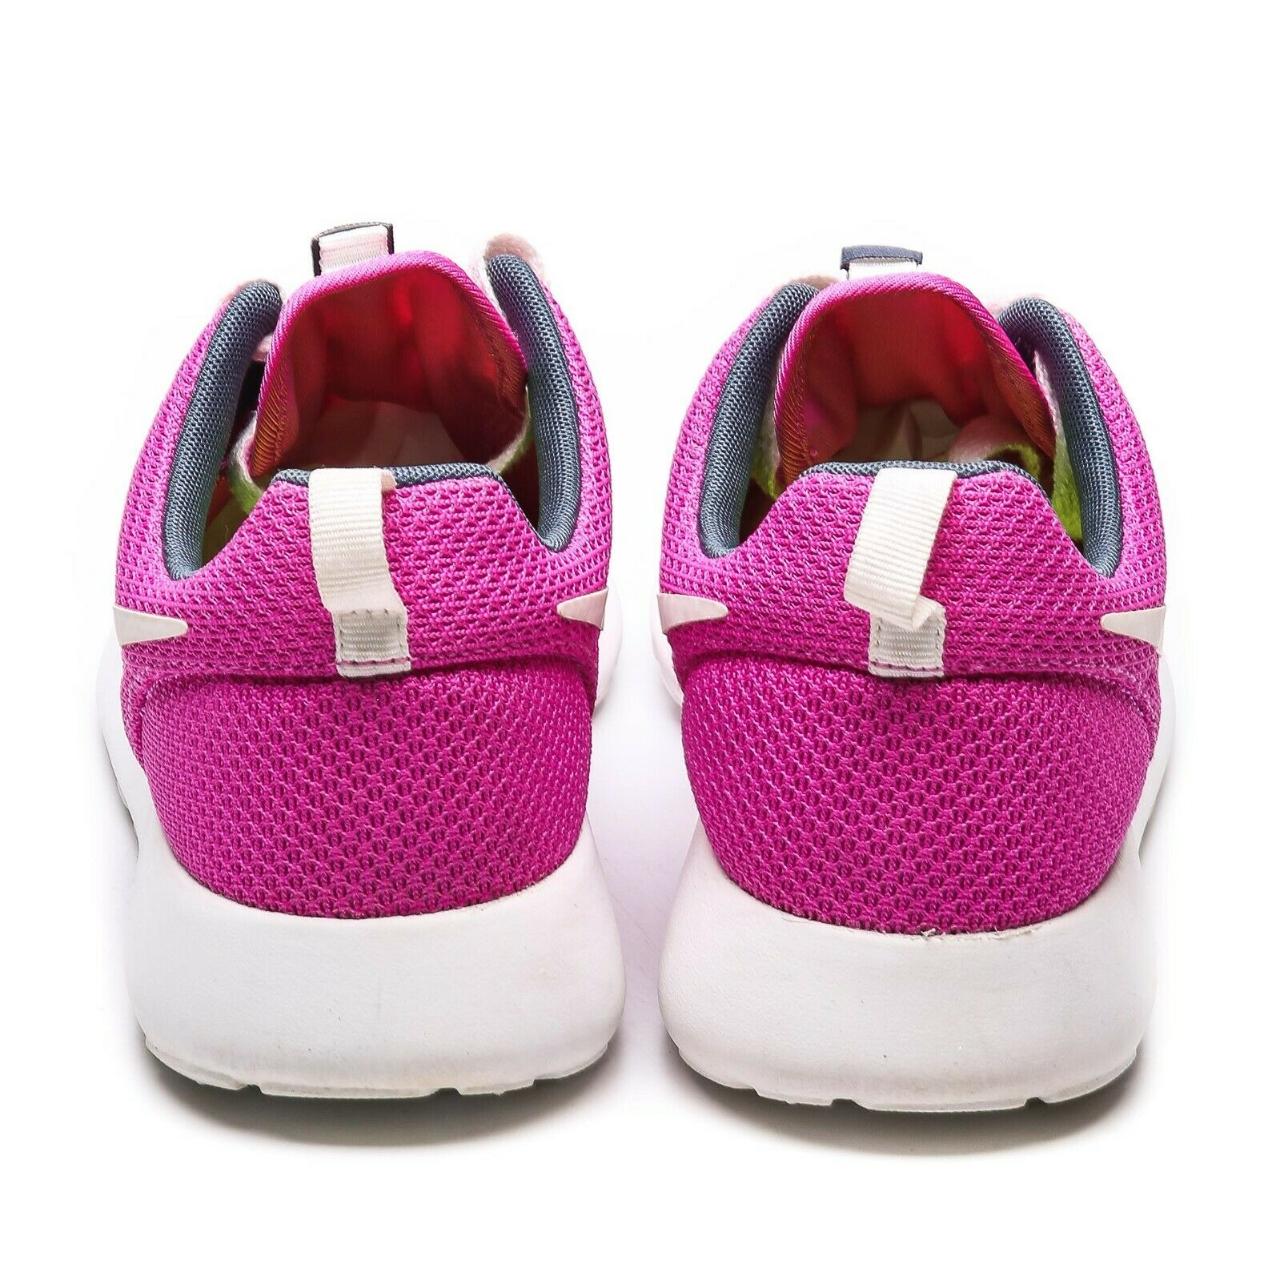 Nike Women's Pink and White Trainers (3)